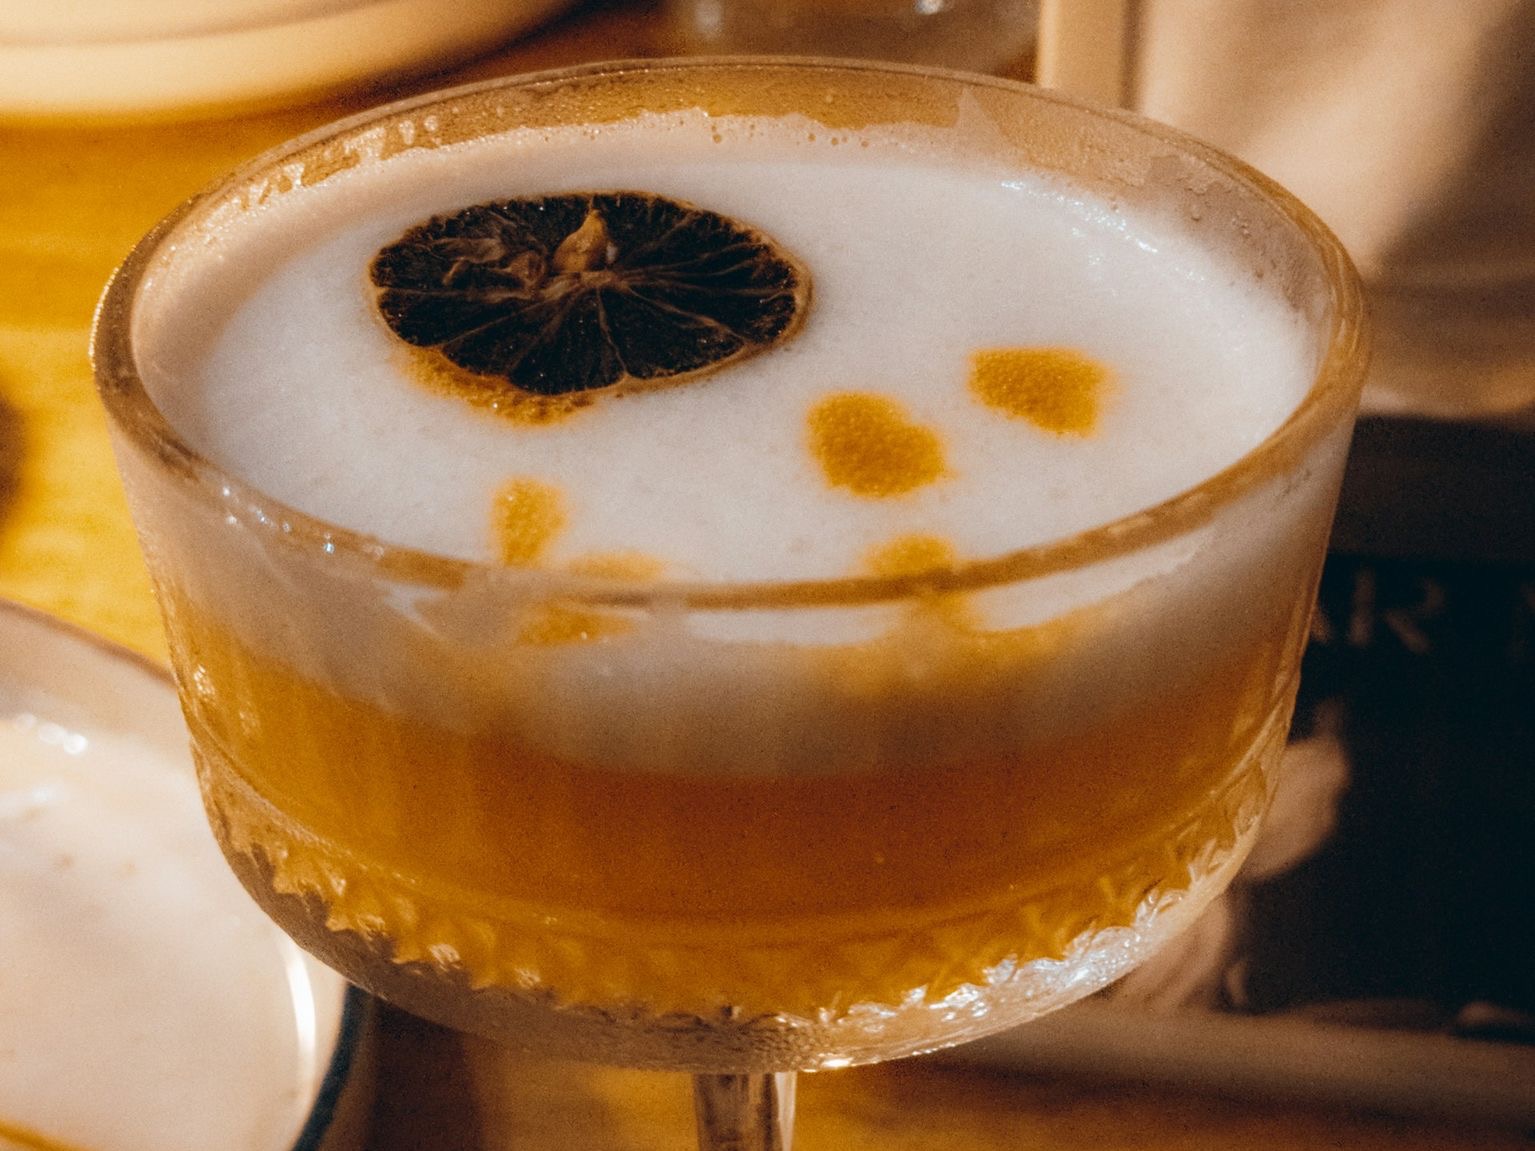 a close up of a drink on a table